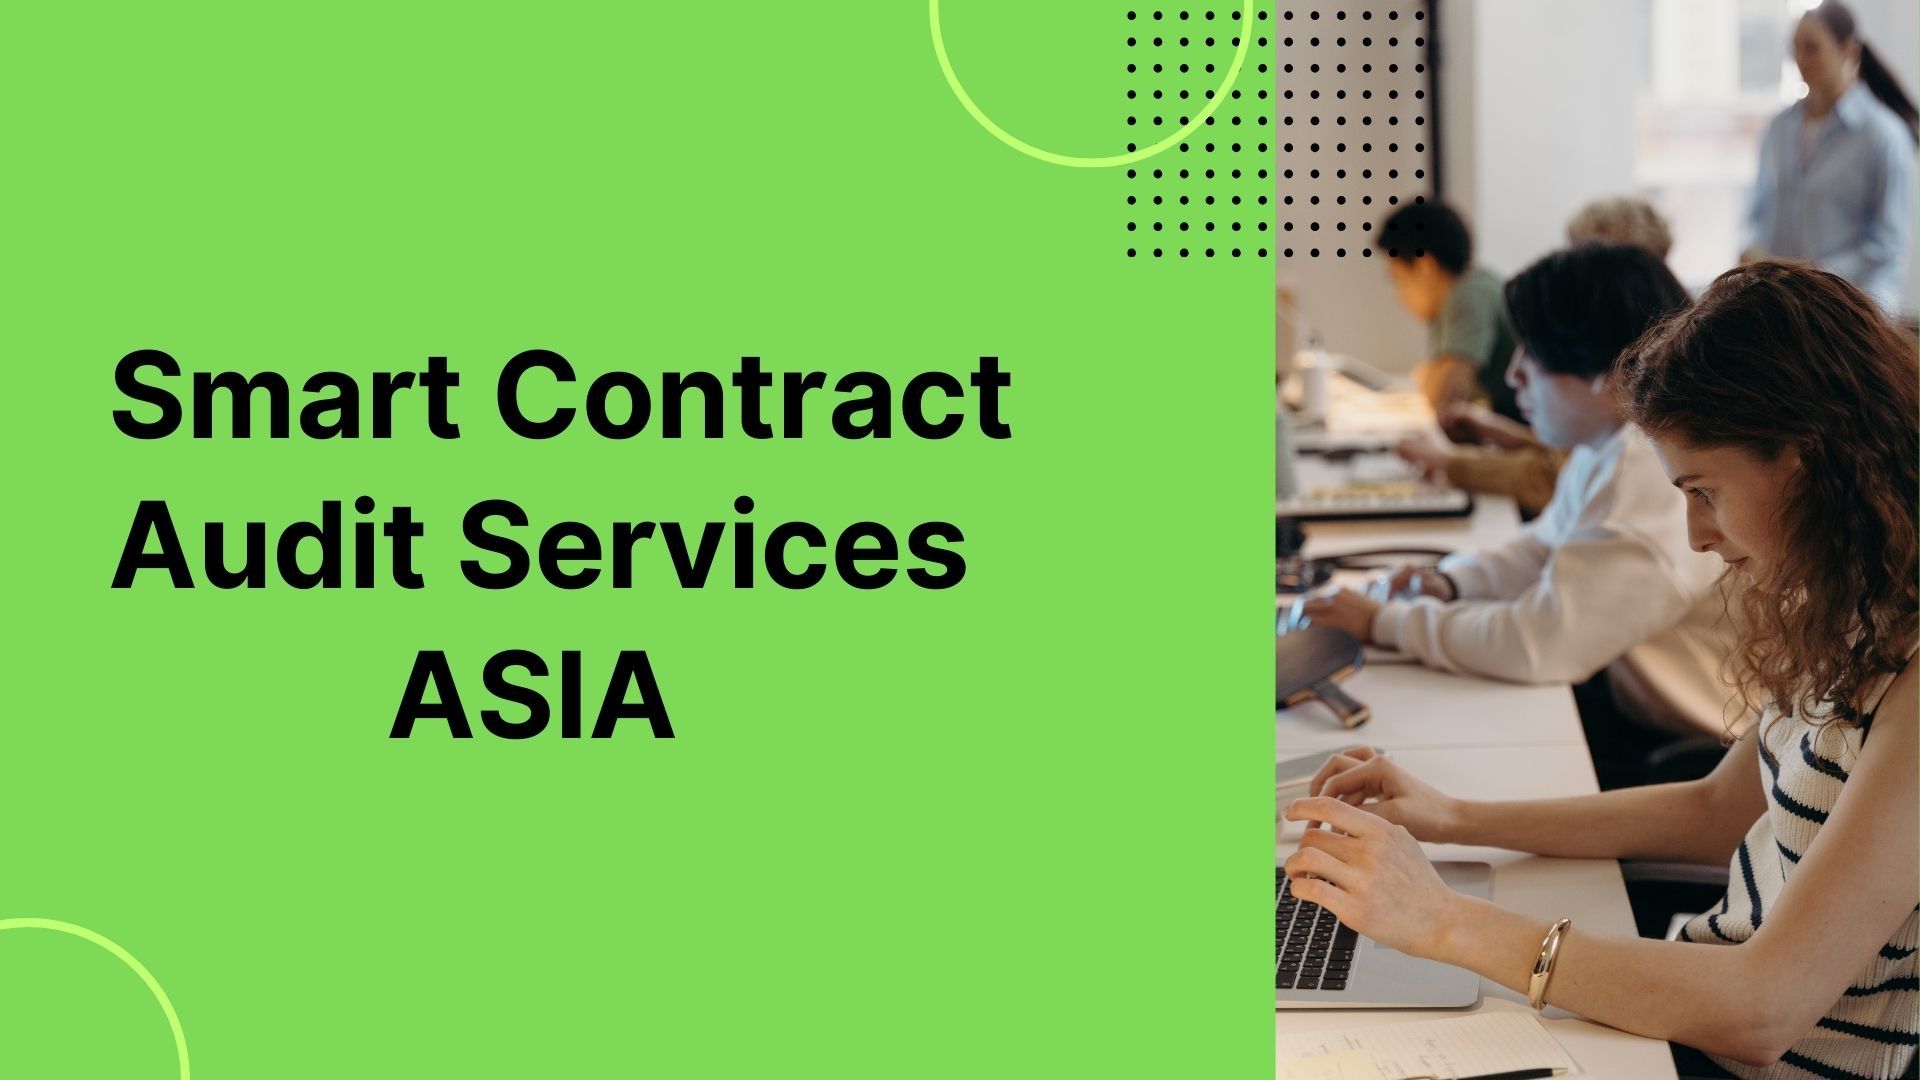 7 Best Smart Contract Audit Services For Asian Developers